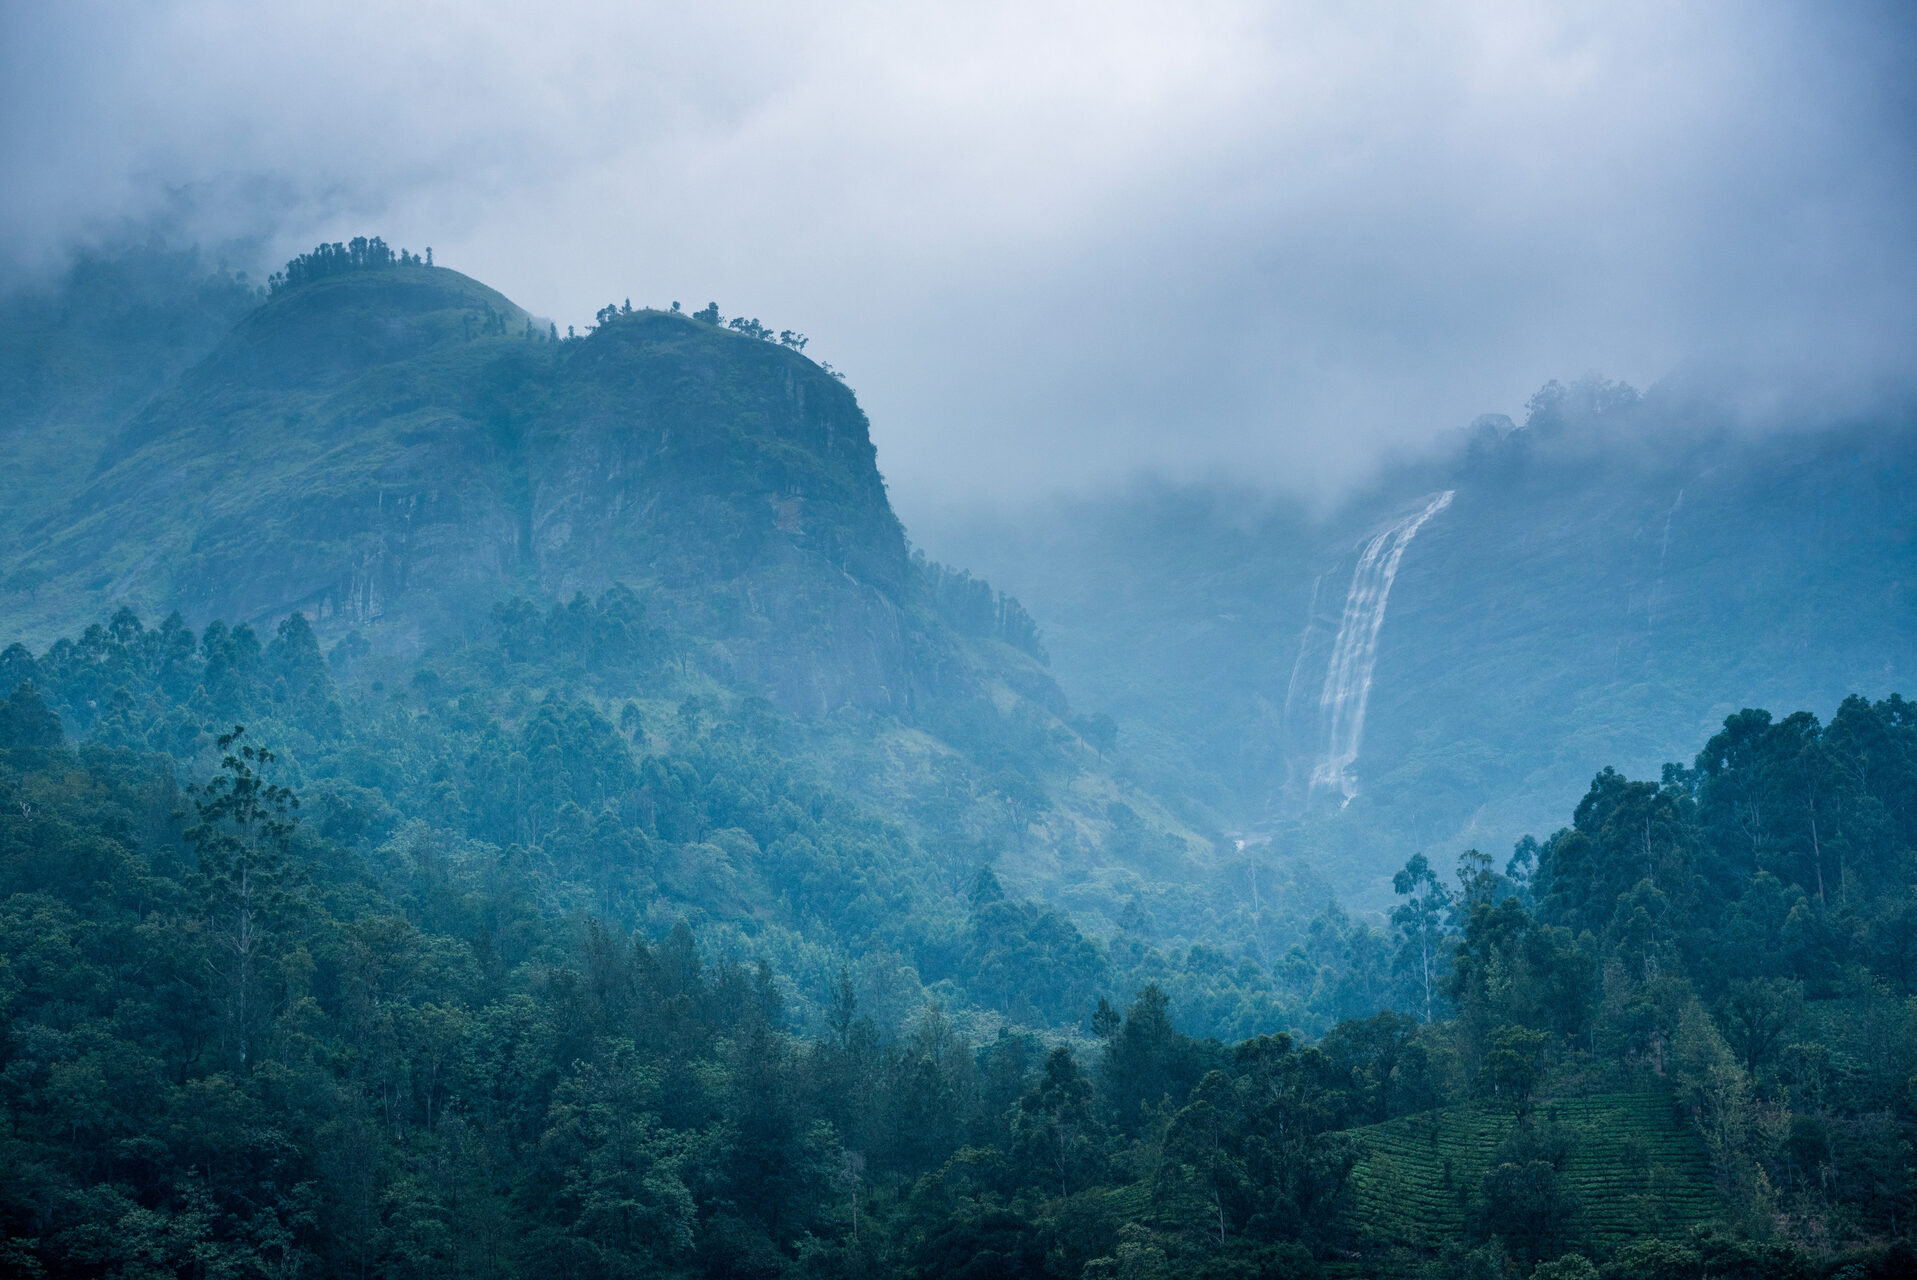 India Landscape Photography Waterfall in the Western Ghats Mountains Munnar Kerala India